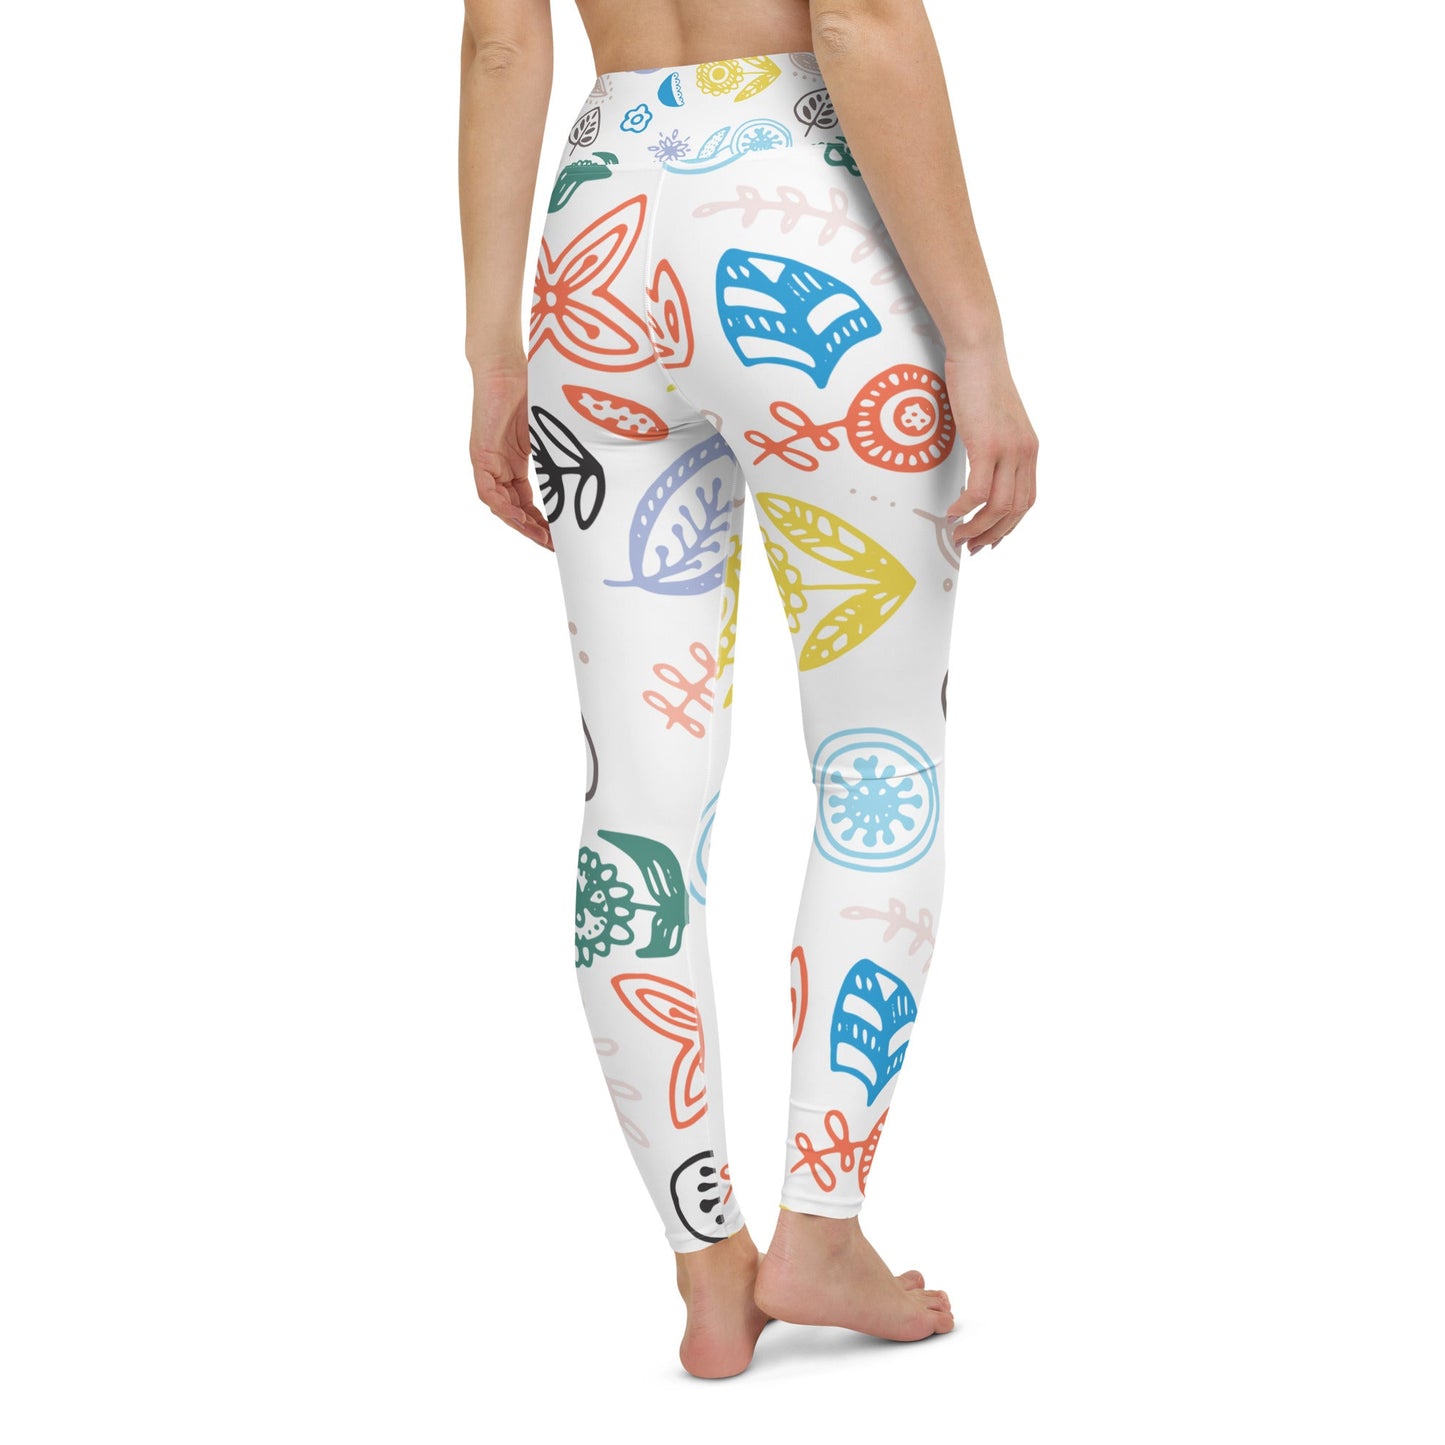 Leaf Yoga Leggings - Find Your Inner Harmony in Style